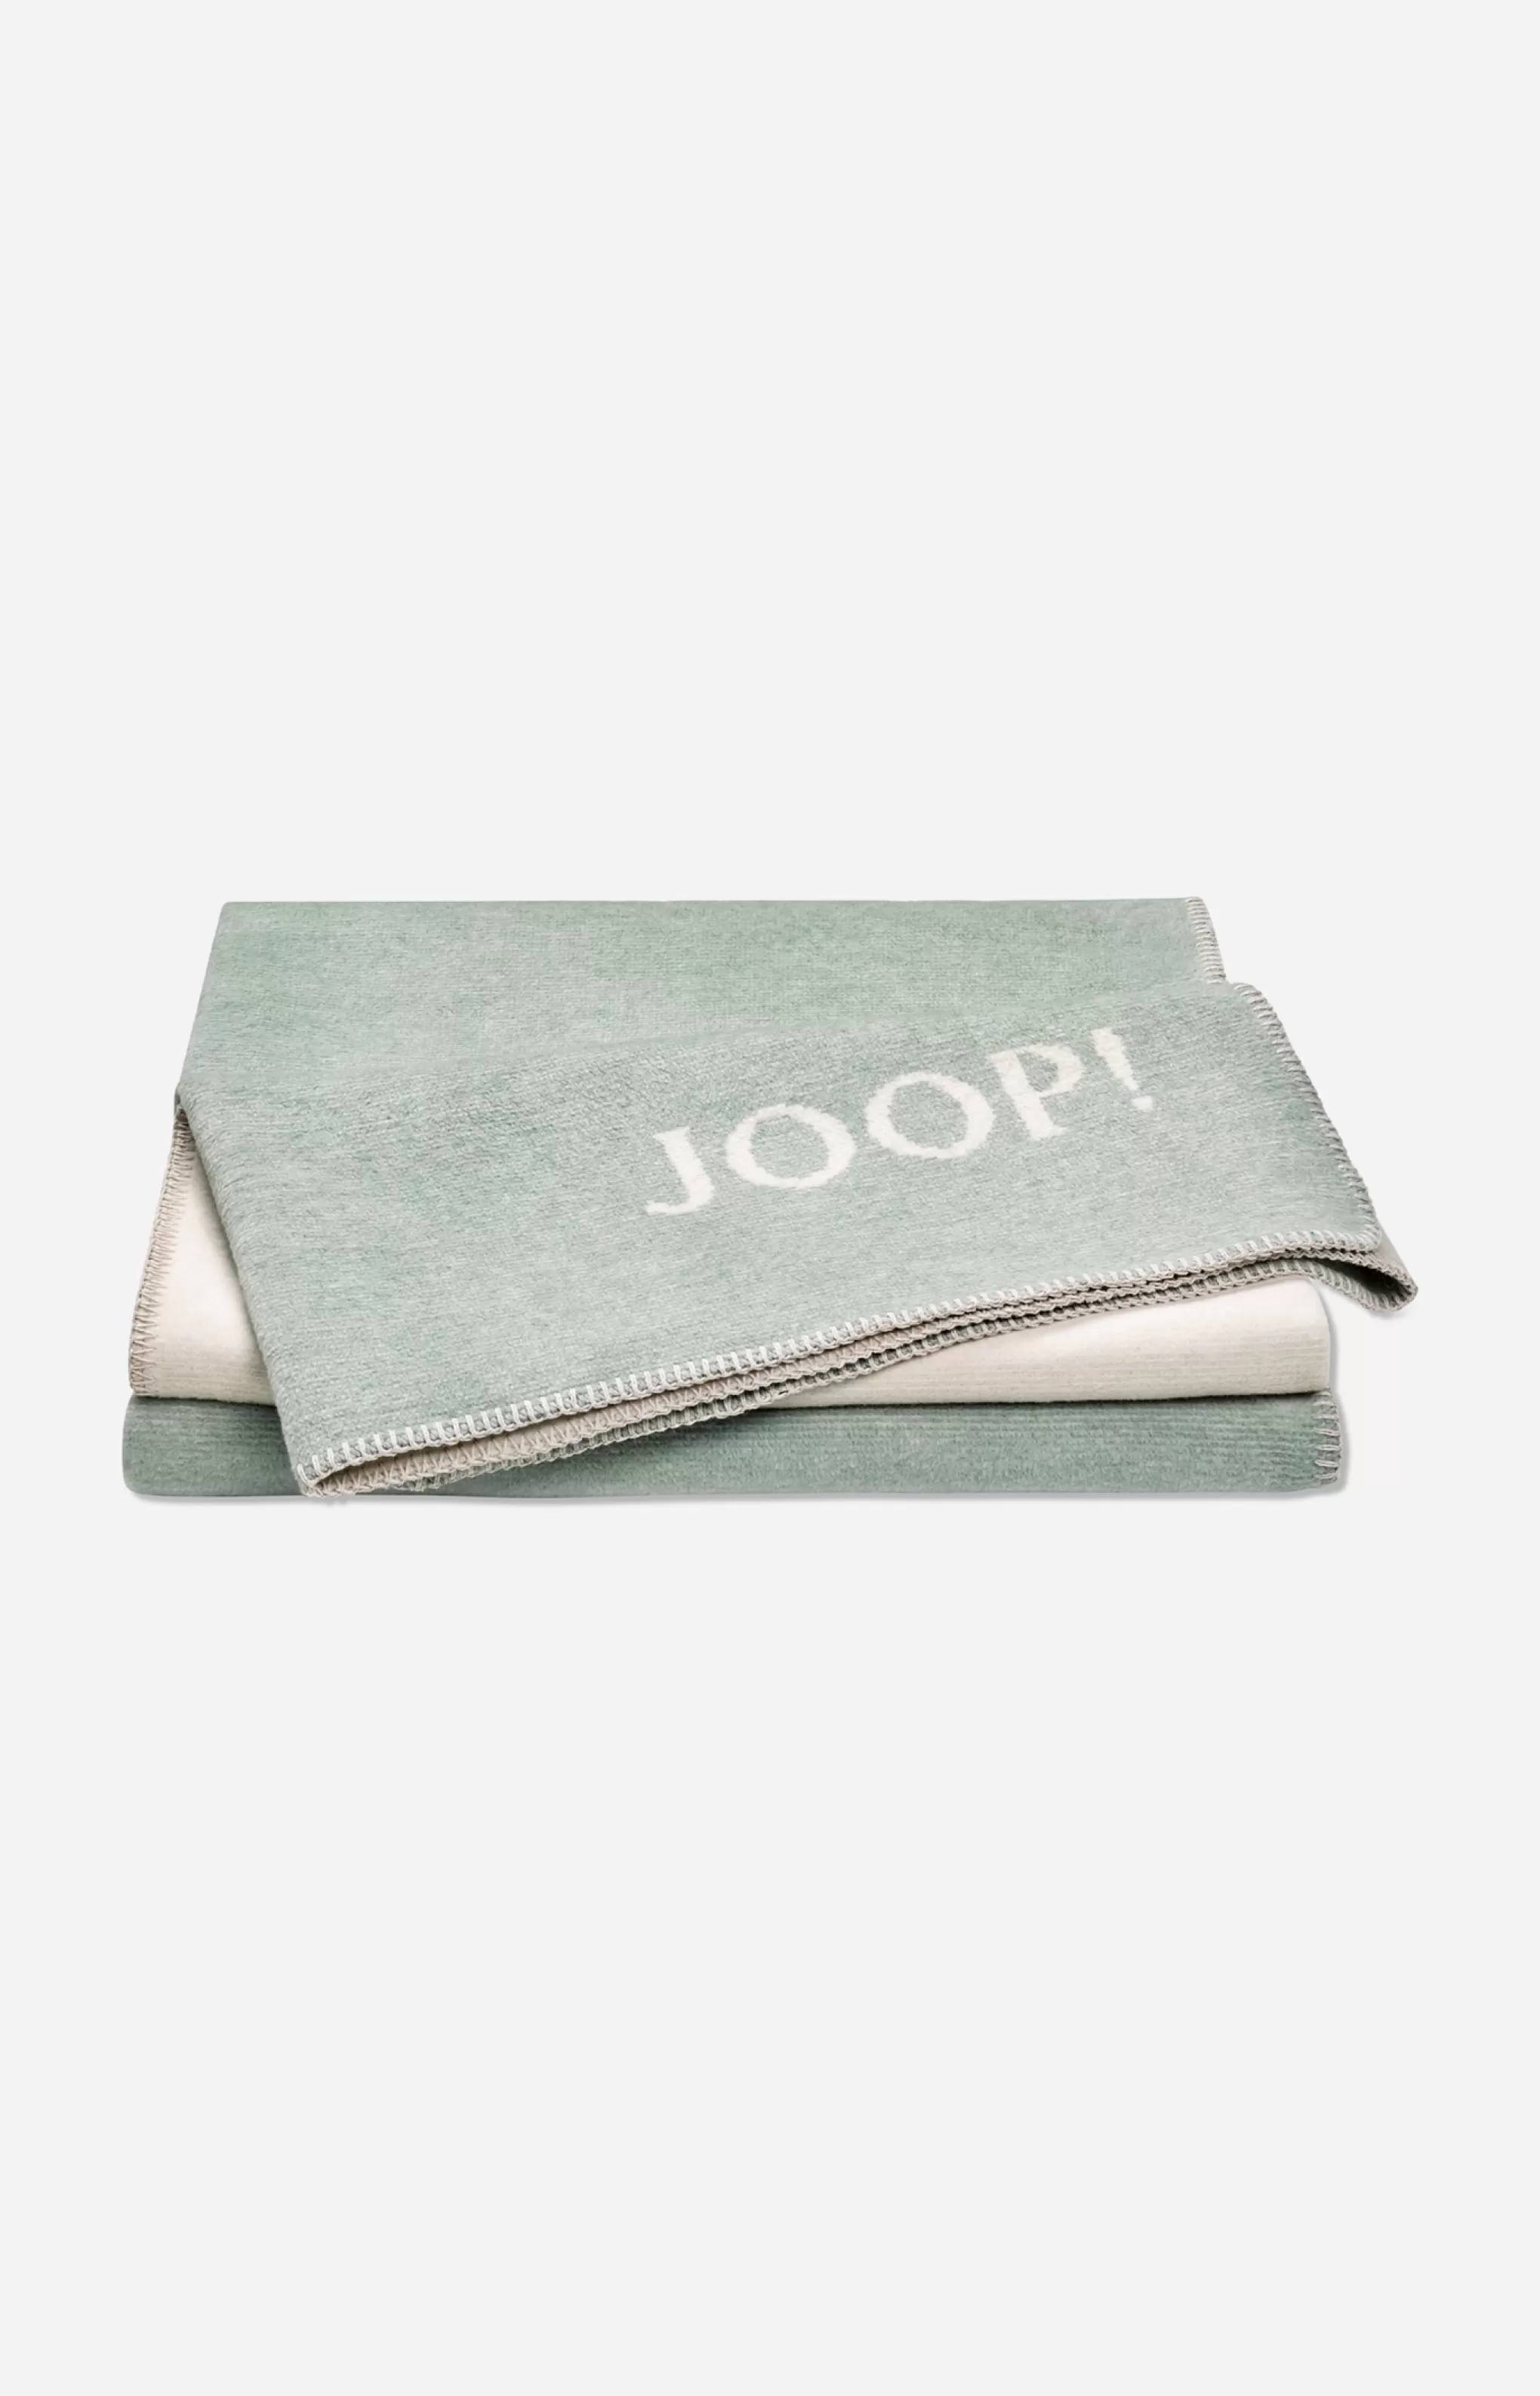 Throws & Blankets | Discover Everything*JOOP Throws & Blankets | Discover Everything ! MELANGE-DOUBLEFACE throw in